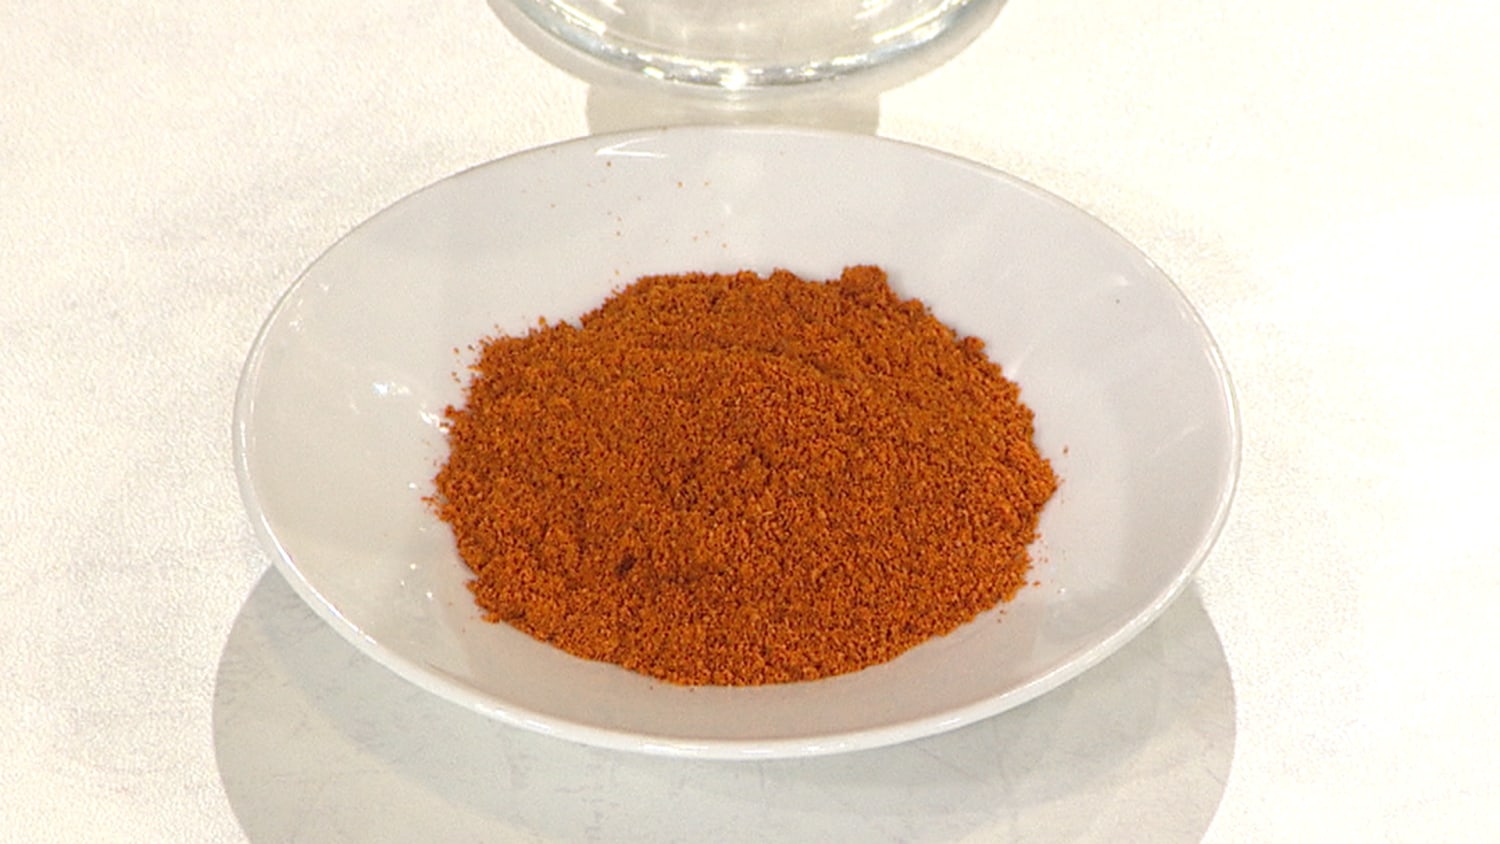 Study finds many cooking spices in stores are laden with heavy metals